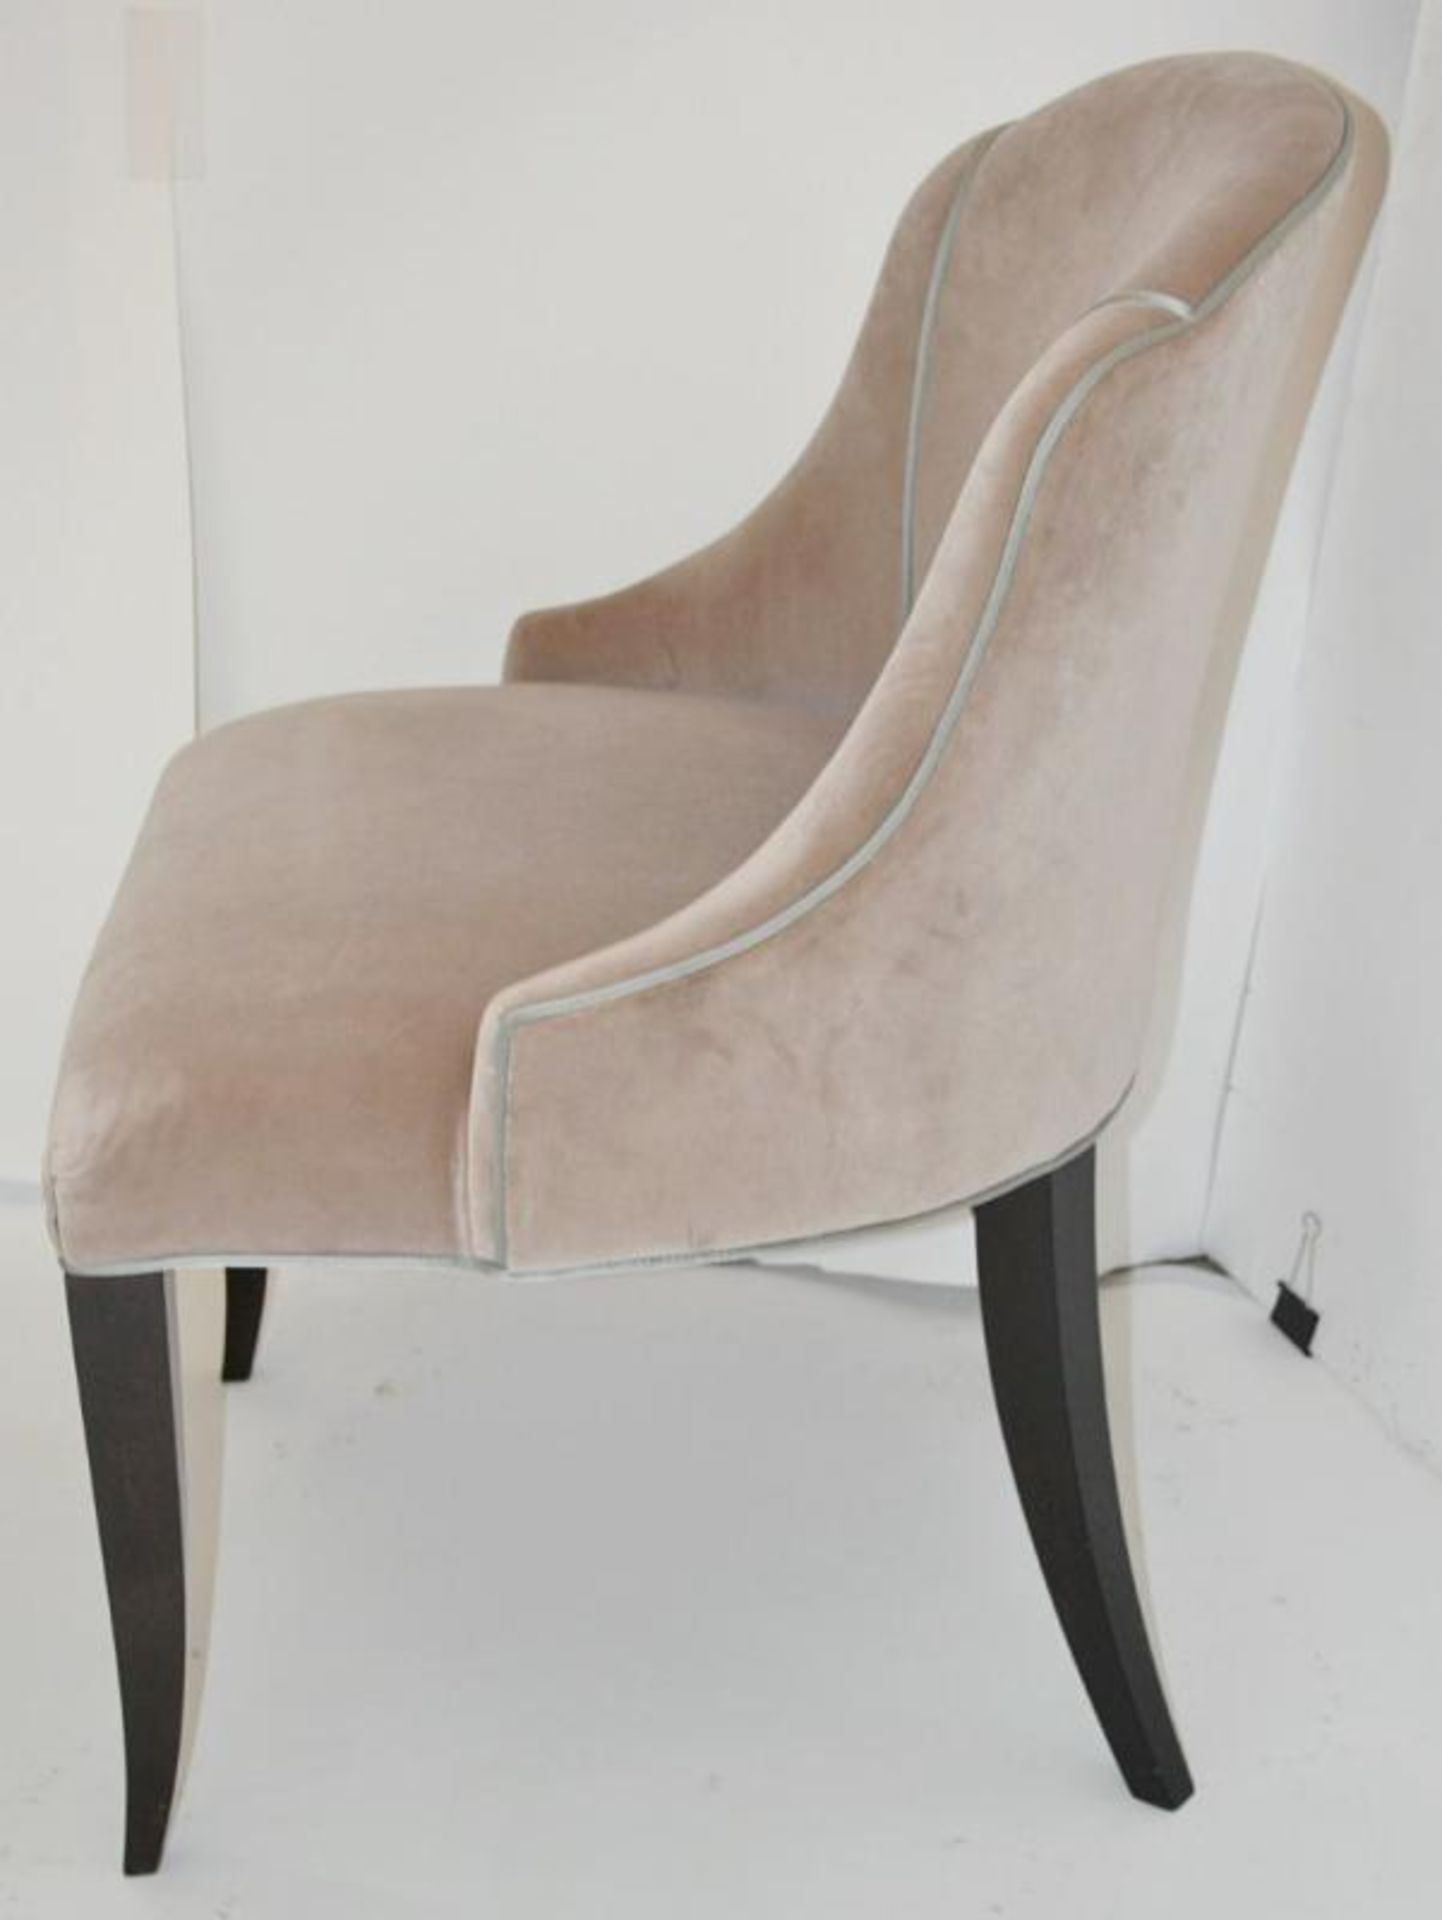 1 x REED &amp; RACKSTRAW "Cloud" Velvet Upholstered Handcrafted Chair - Dimensions: H87 x W58 x D5 - Image 7 of 24